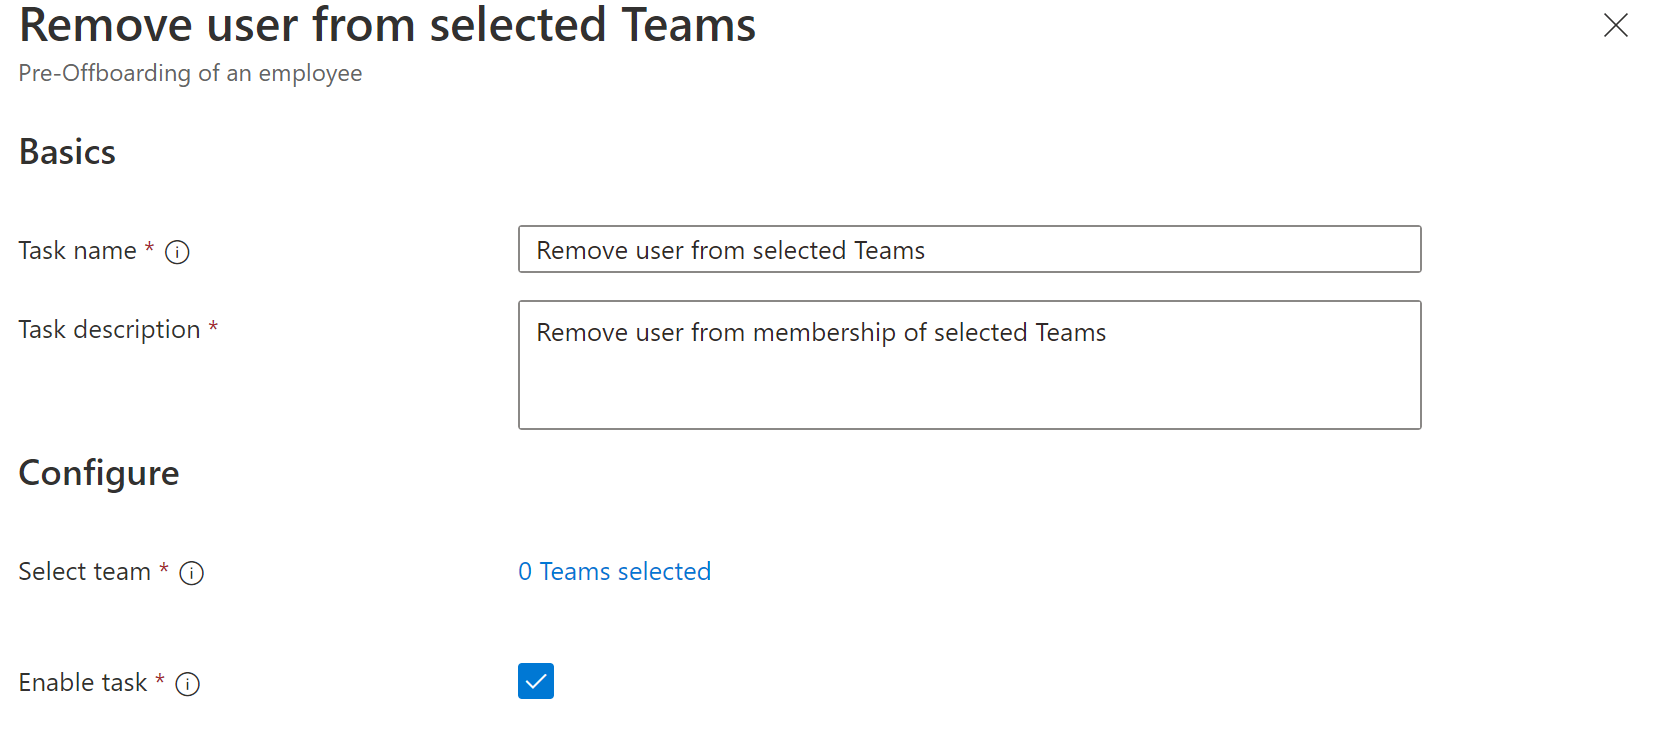 Screenshot of Workflows task: remove user from teams.